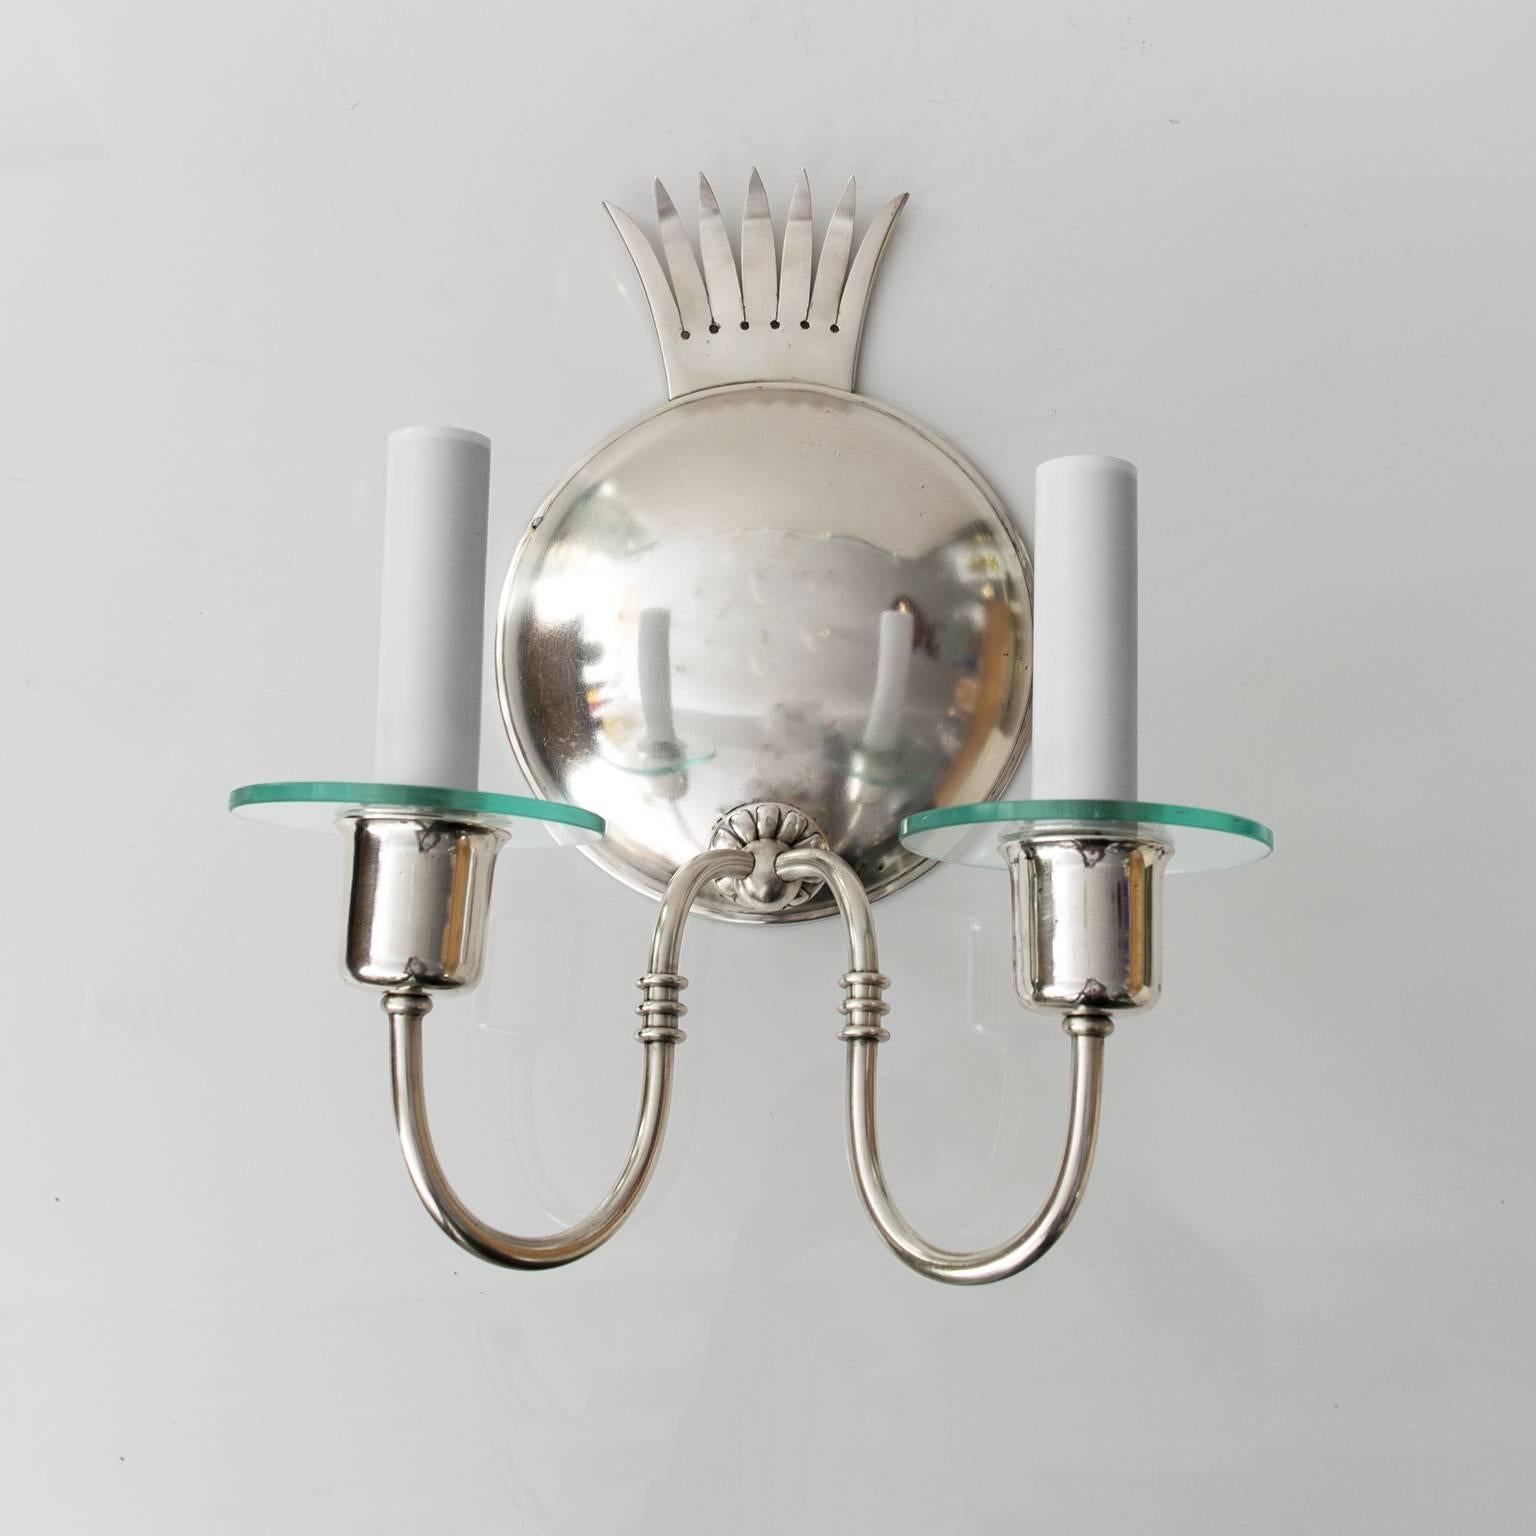 Silvered Pair of Scandinavian Modern Silver Plate Sconces by Elis Bergh for C.G. Hallberg